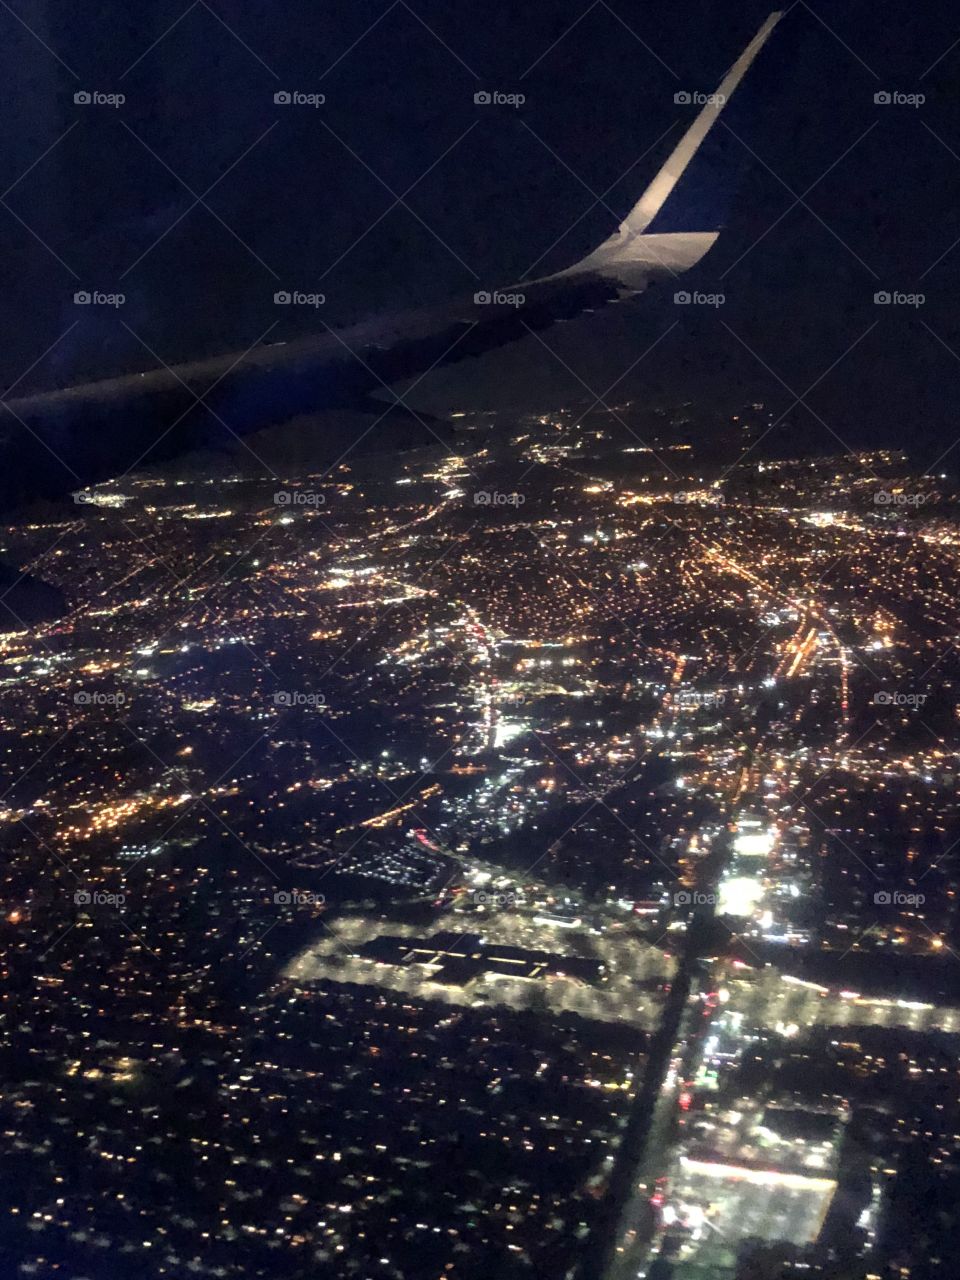 A picture of an illuminated city scape taken from the window of an airplane on an evening flight. 